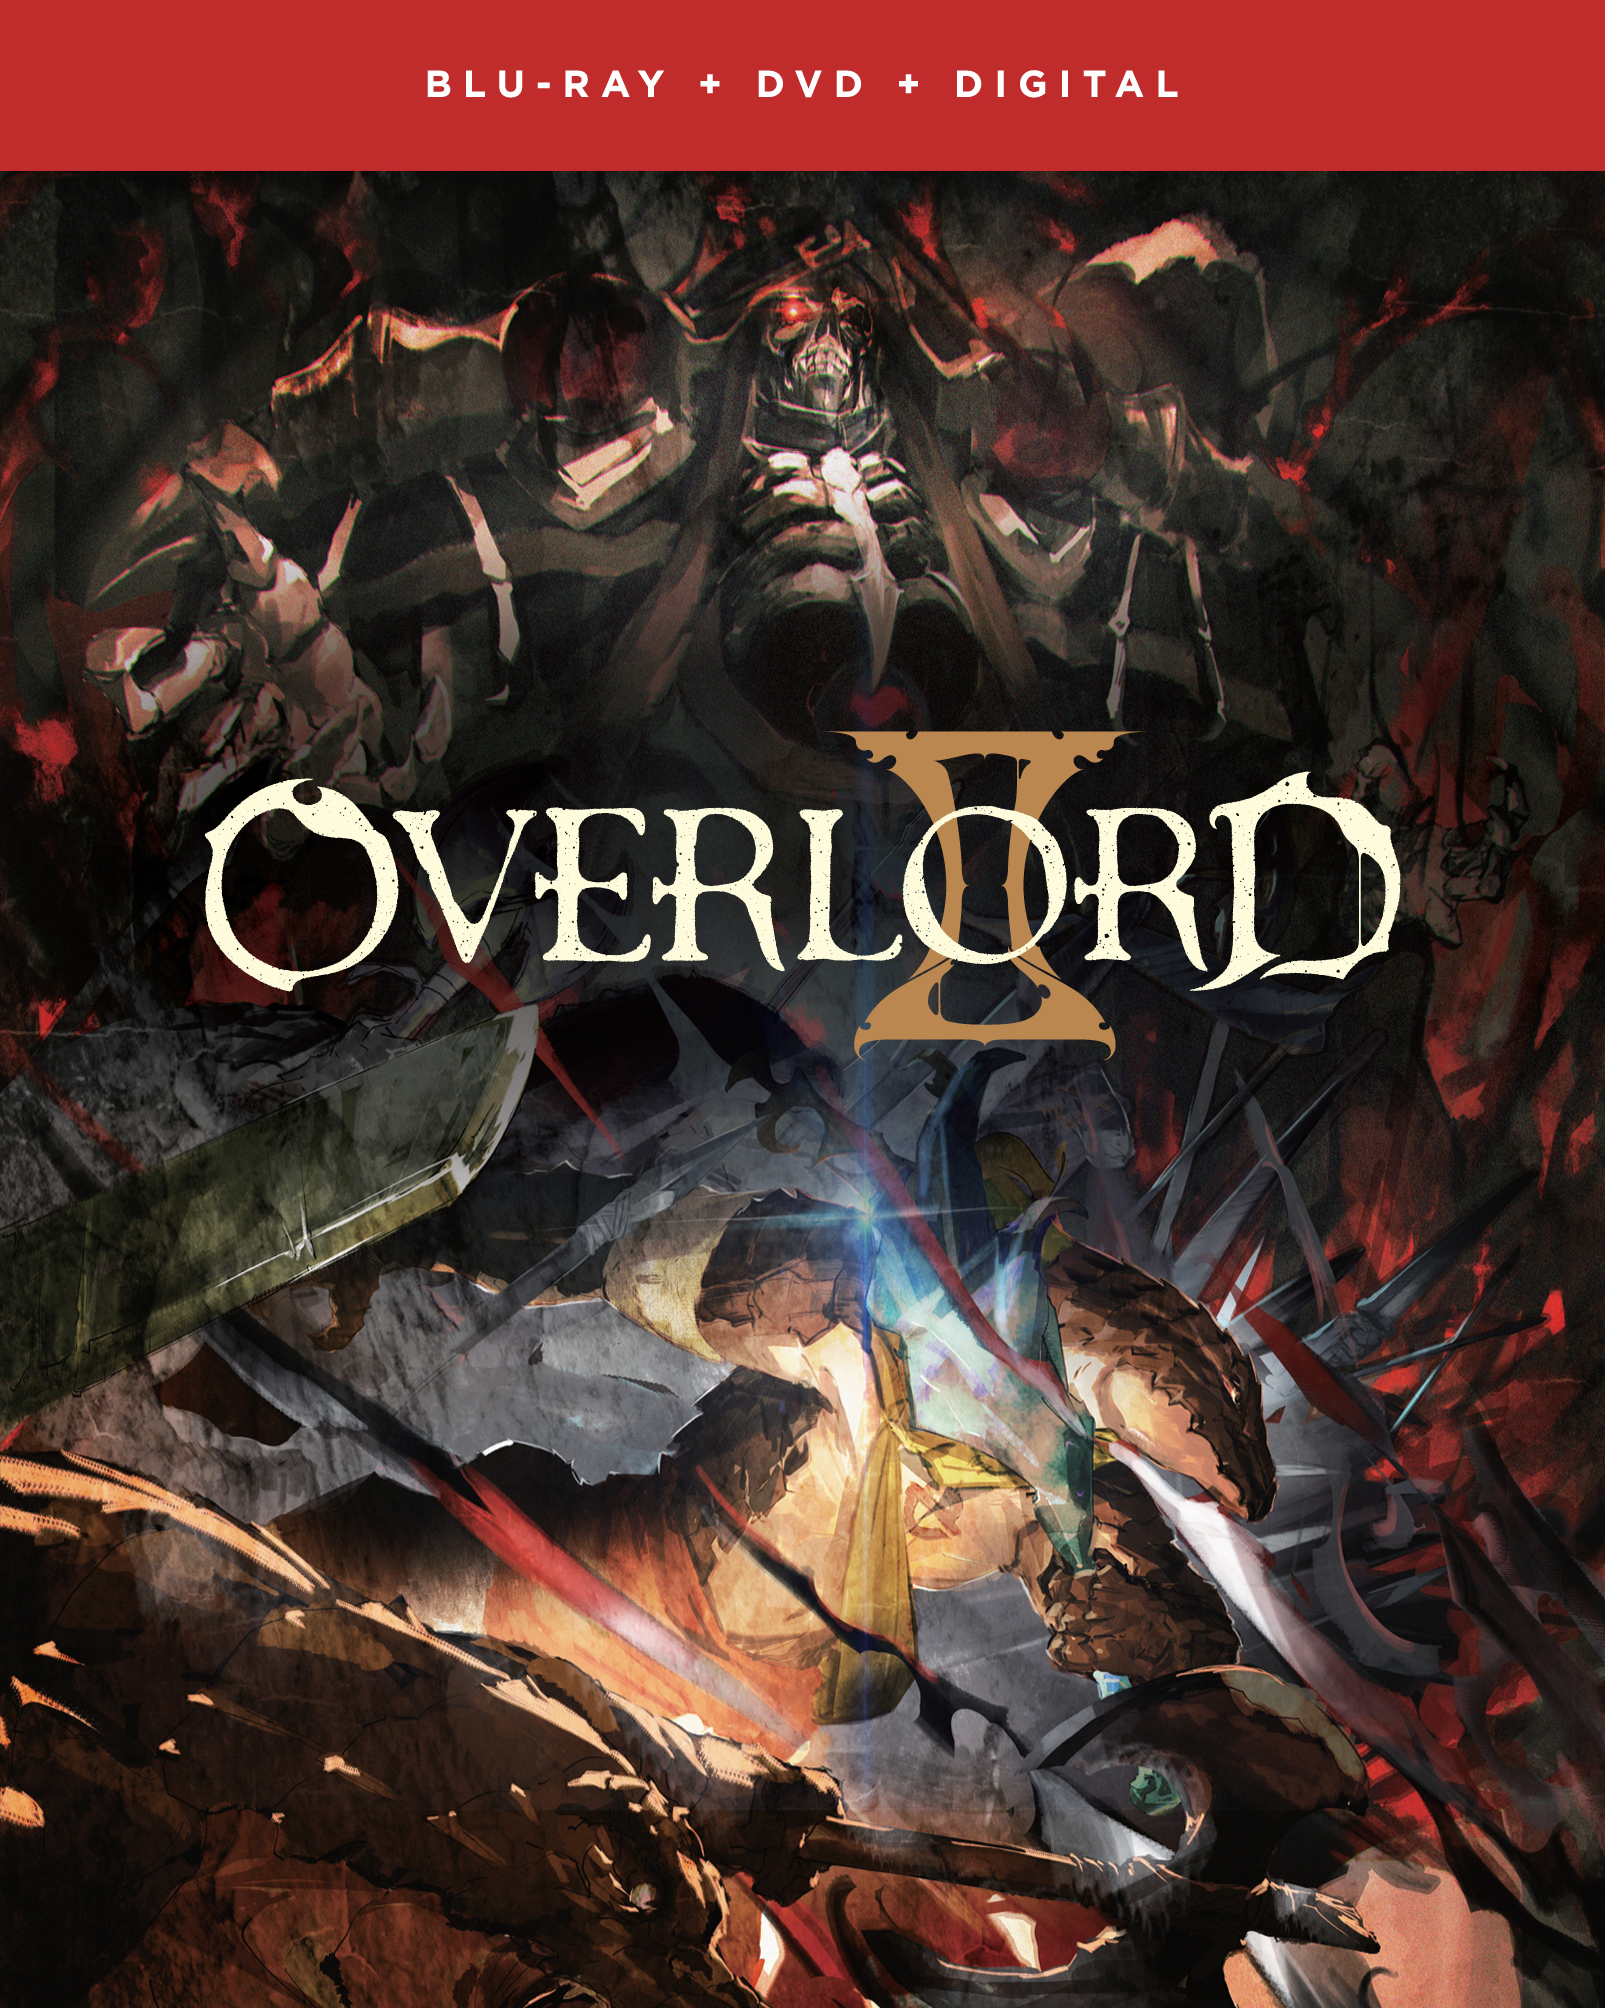 Anime Review: Overlord II